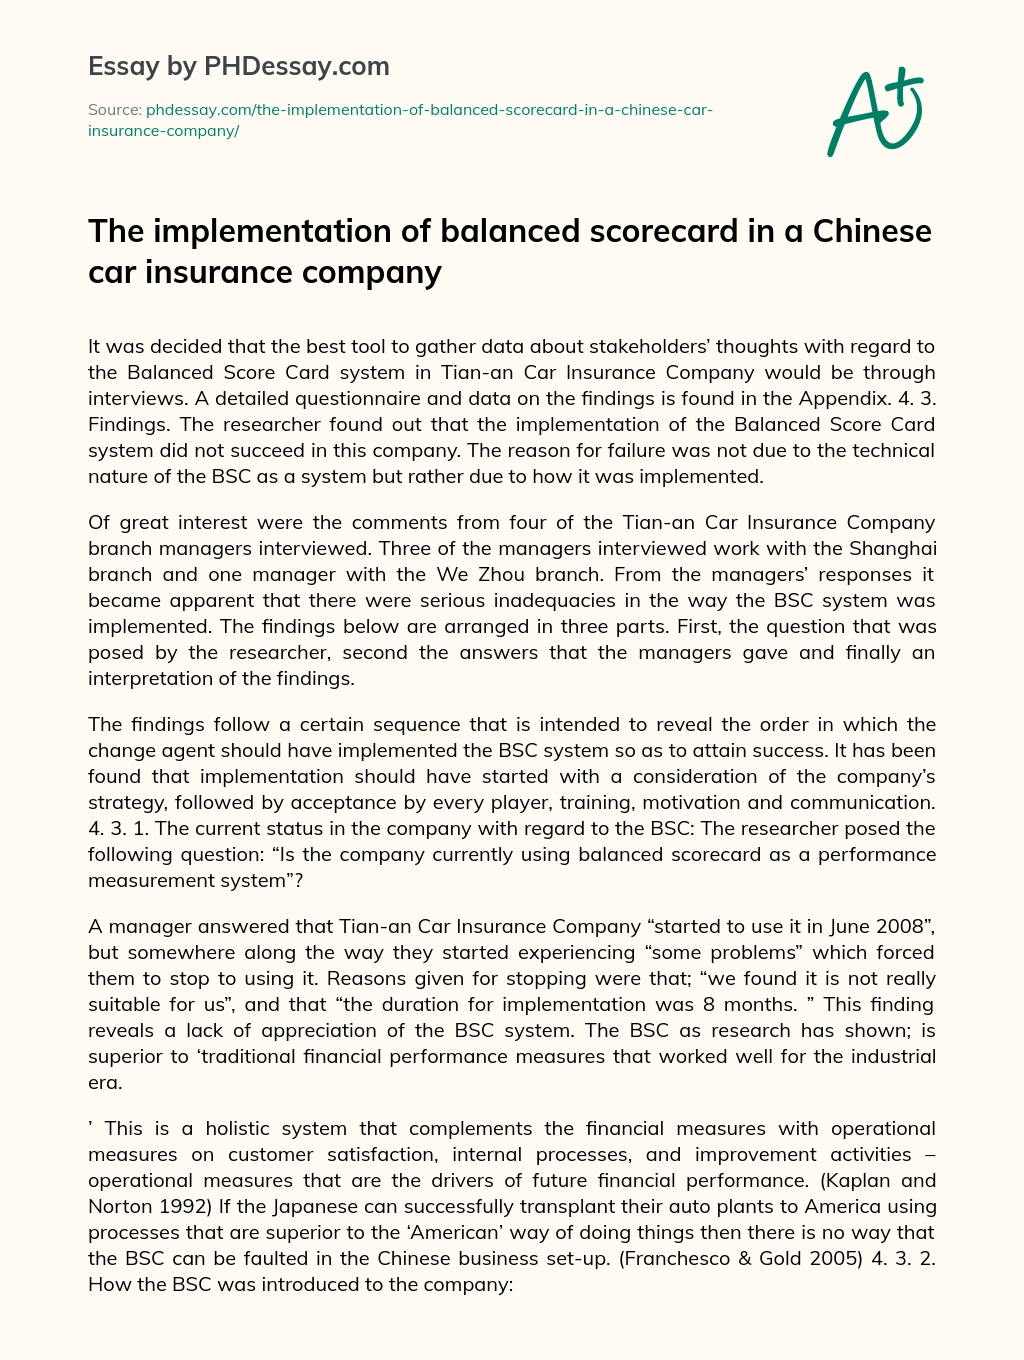 The implementation of balanced scorecard in a Chinese car insurance company essay